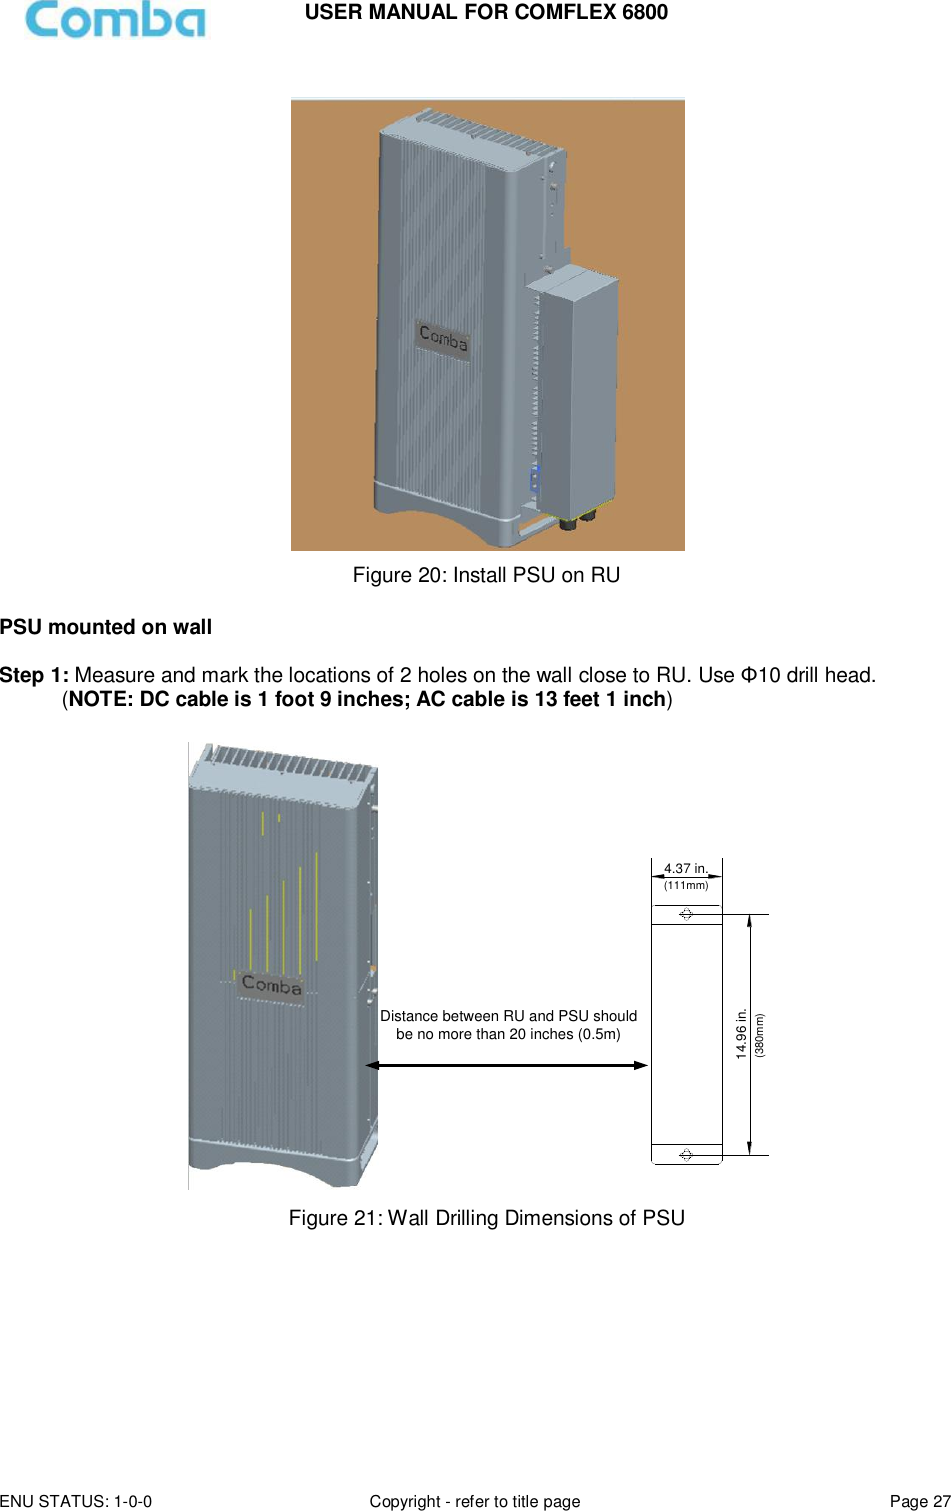 USER MANUAL FOR COMFLEX 6800 ENU STATUS: 1-0-0 Copyright - refer to title page Page 27    Figure 20: Install PSU on RU  PSU mounted on wall  Step 1: Measure and mark the locations of 2 holes on the wall close to RU. Use Φ10 drill head.  (NOTE: DC cable is 1 foot 9 inches; AC cable is 13 feet 1 inch)  14.96 in.4.37 in.(111mm)(380mm)Distance between RU and PSU should be no more than 20 inches (0.5m) Figure 21: Wall Drilling Dimensions of PSU         